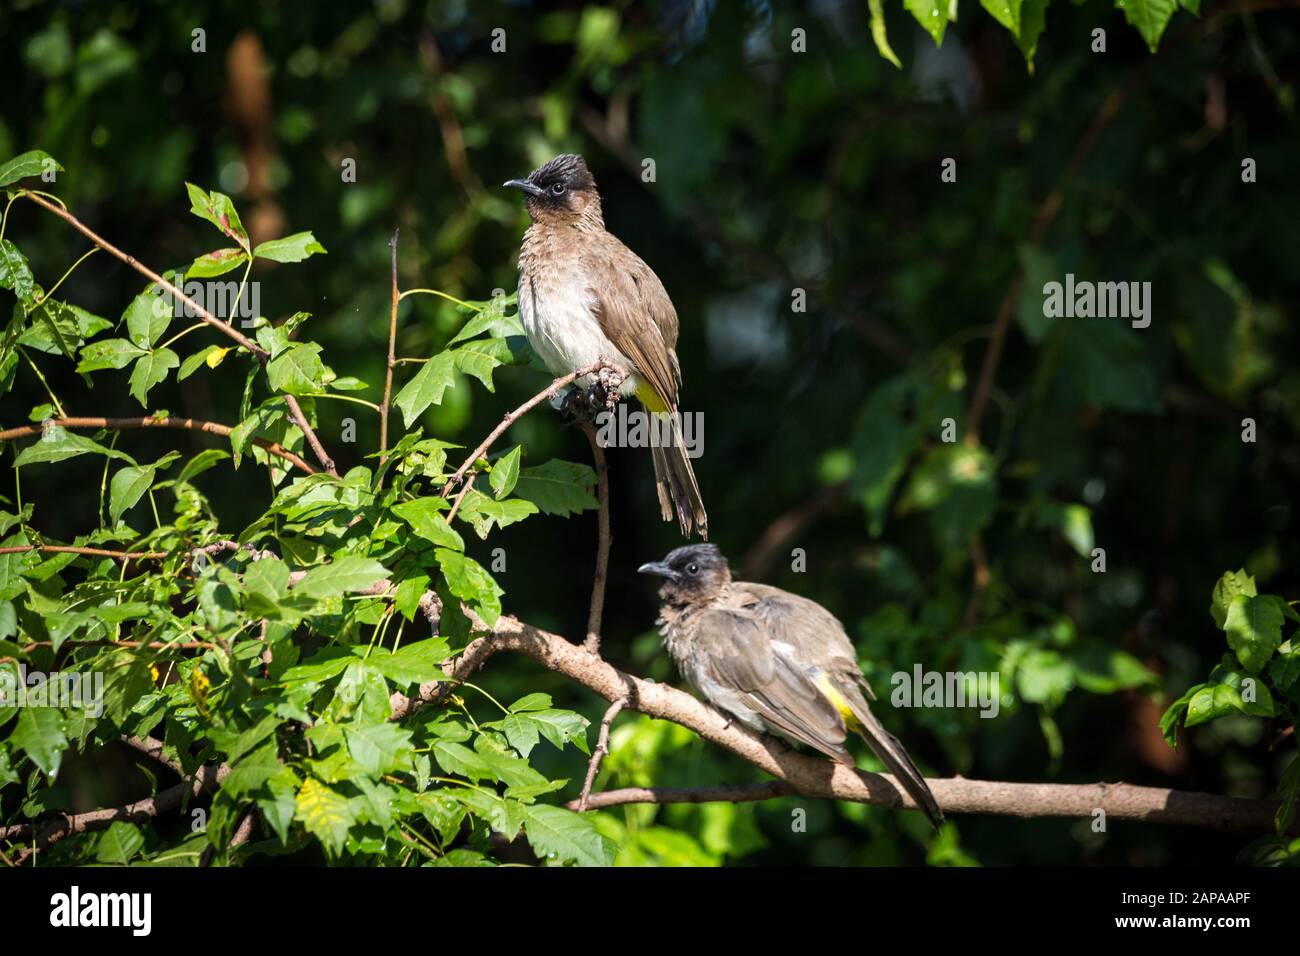 Two Dark-Capped Bulbul birds (Pycnonotus tricolor) on a branch, South Africa Stock Photo